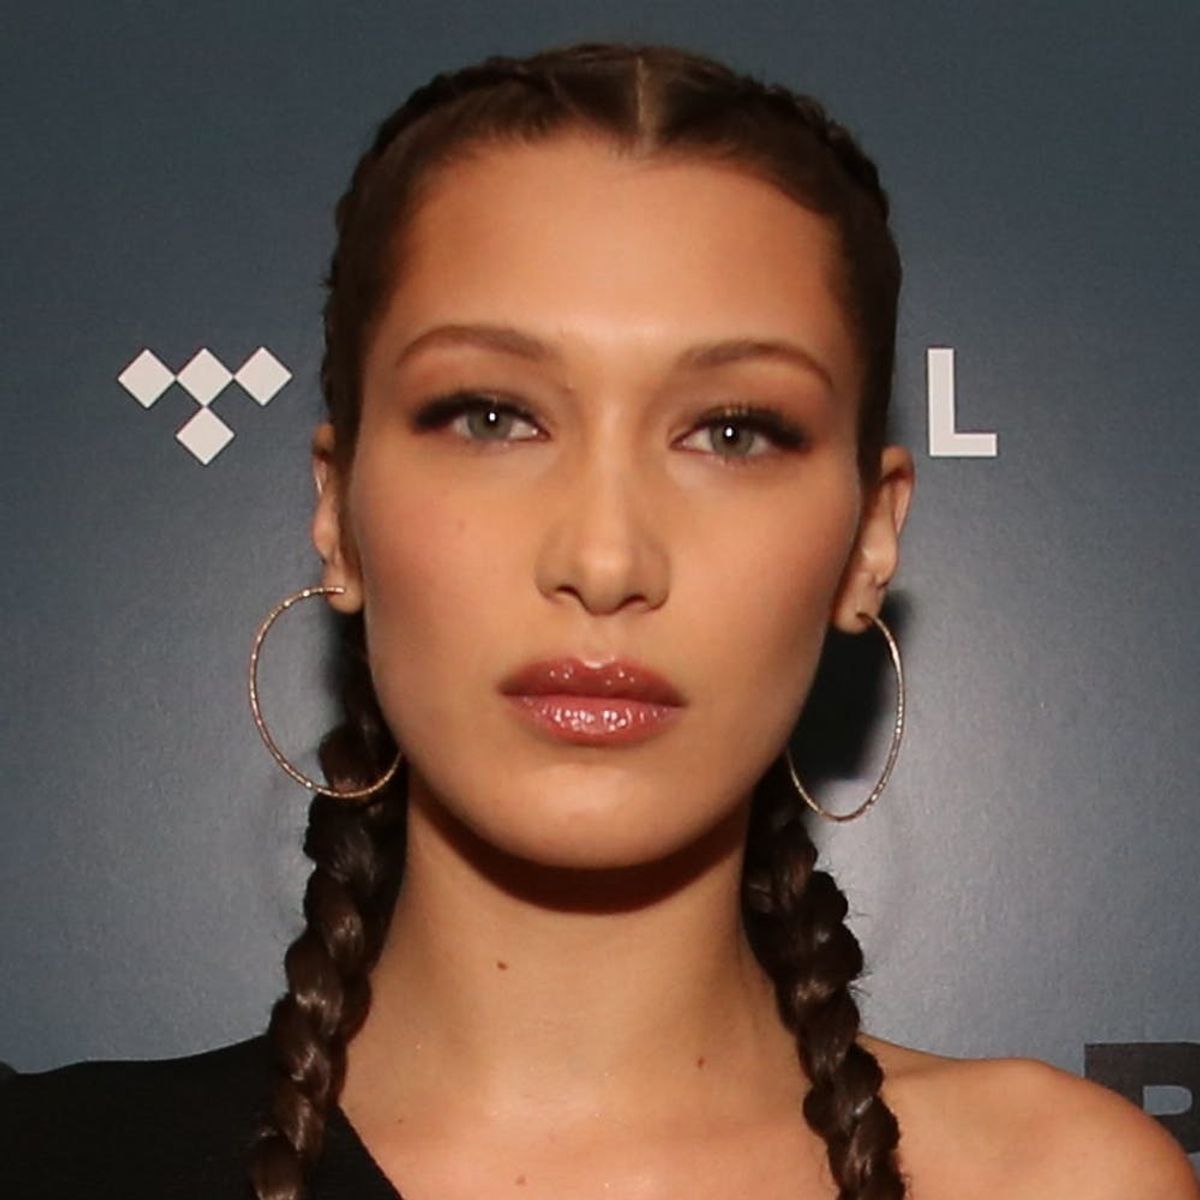 Bella Hadid Just Upped the Shade Ante in Her Bad Love Triangle With The Weeknd and Selena Gomez